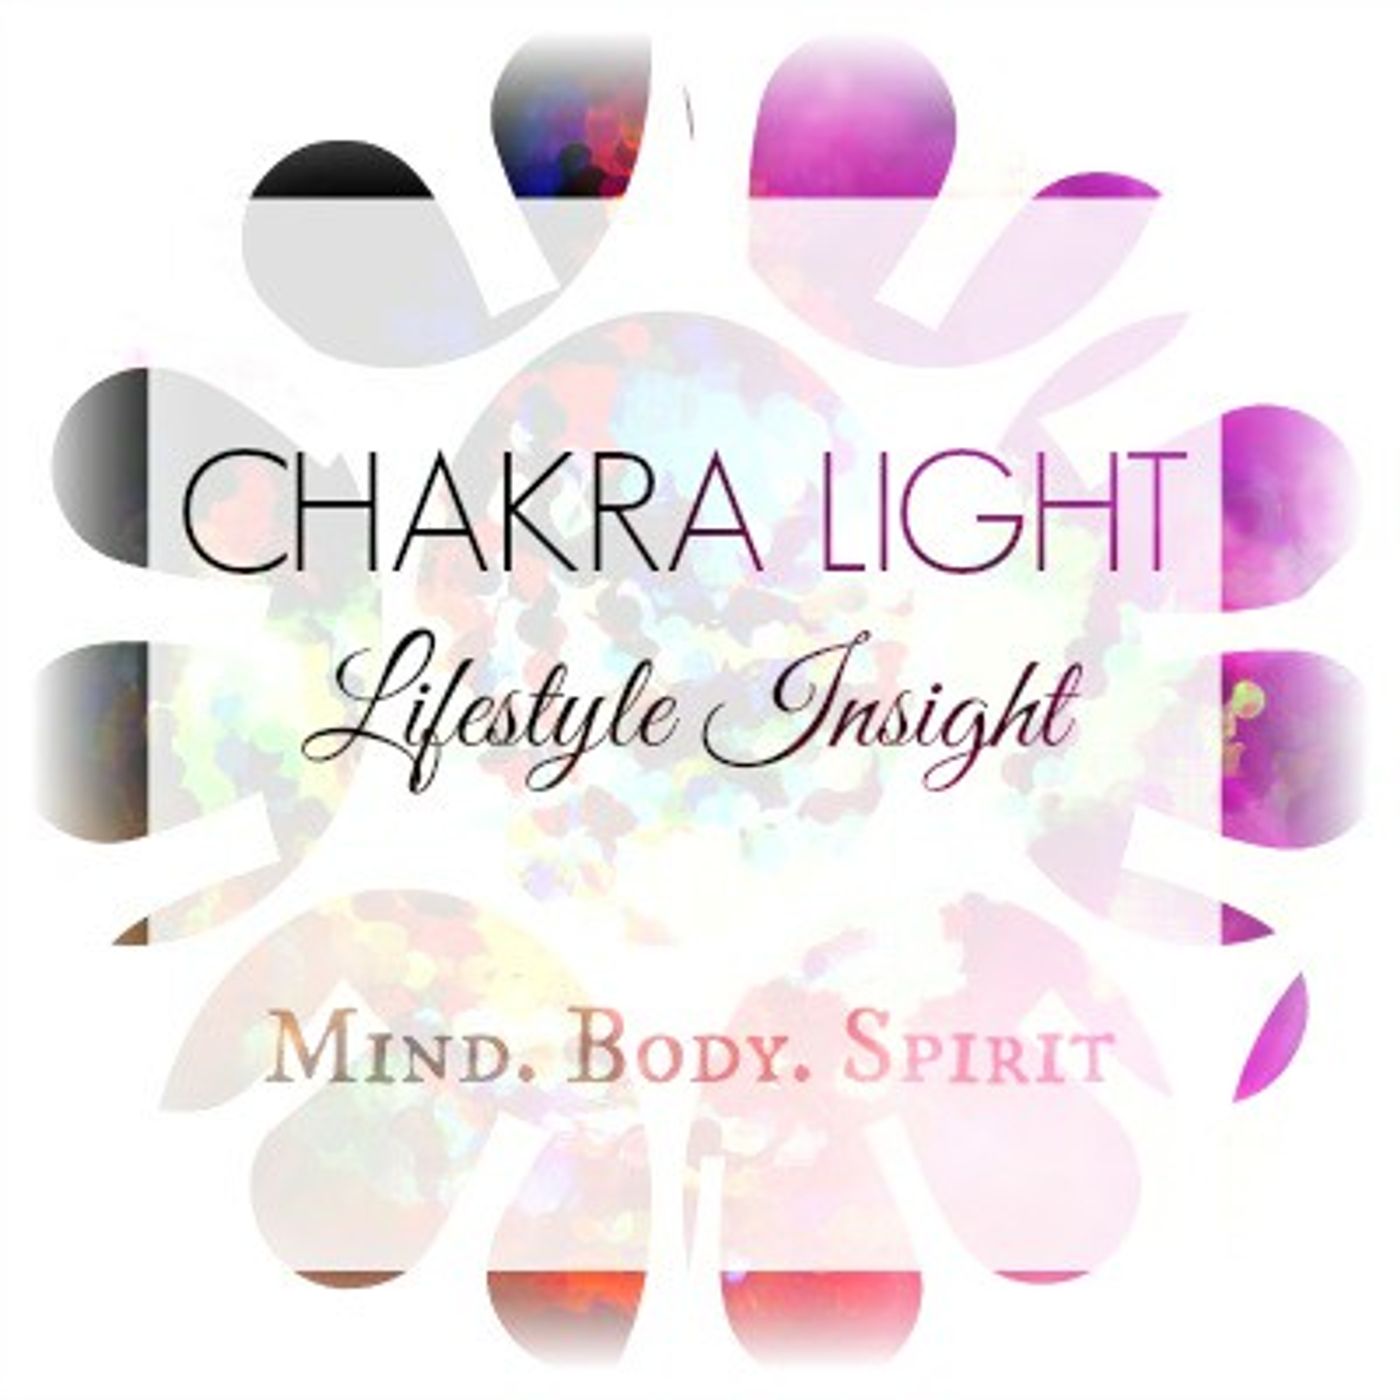 Third Eye Chakra - Develop Your Intuition